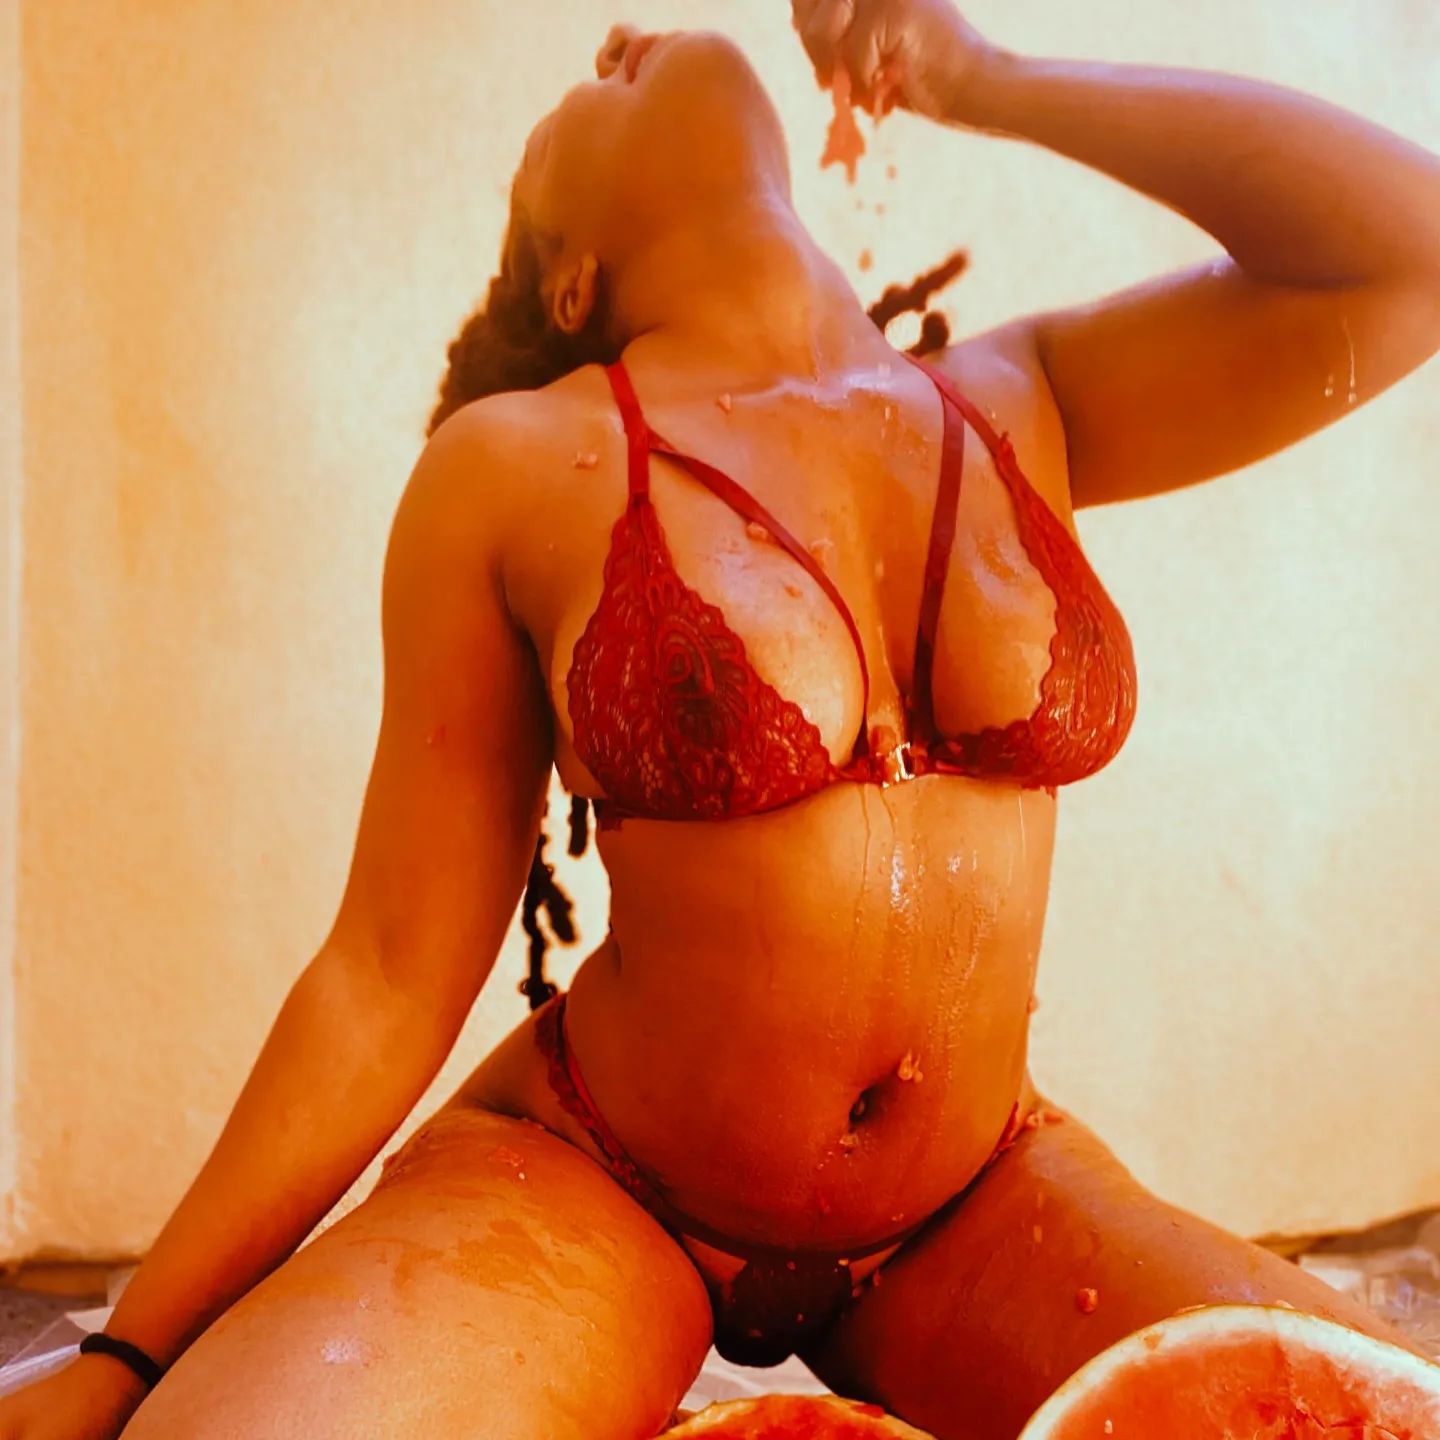 Where has the summer gone 😕 

#summervibes #watermelonsugar #Trending #only#fypシ #melanin #findomgoddess #paypigswanted #sugarbabyneededtobespoilt #sexpositiveculture #lingerieaddict #sensuality #goddess